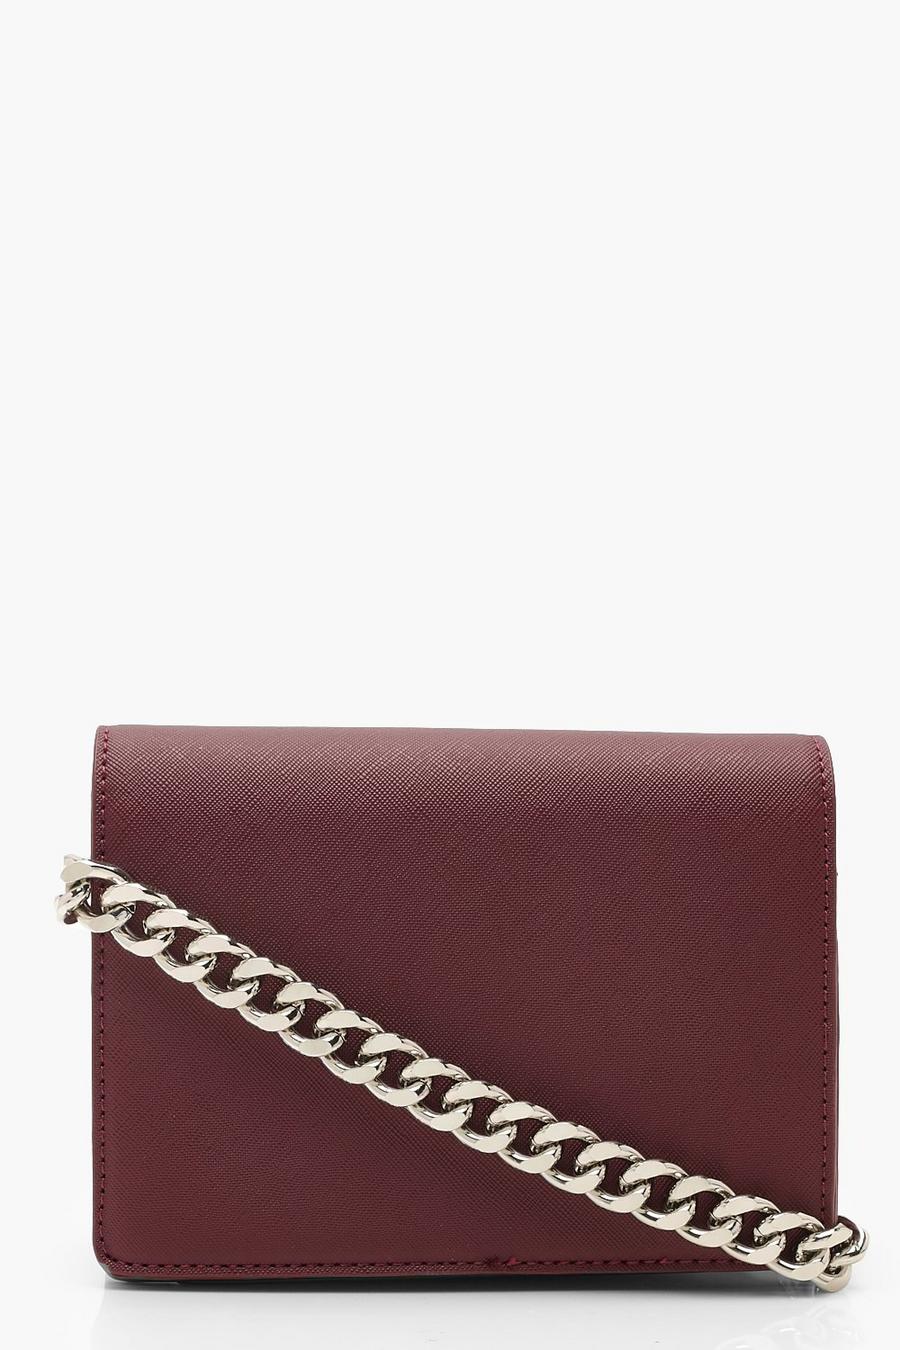 Berry Chunky Chain Hatch Cross Body Bag image number 1